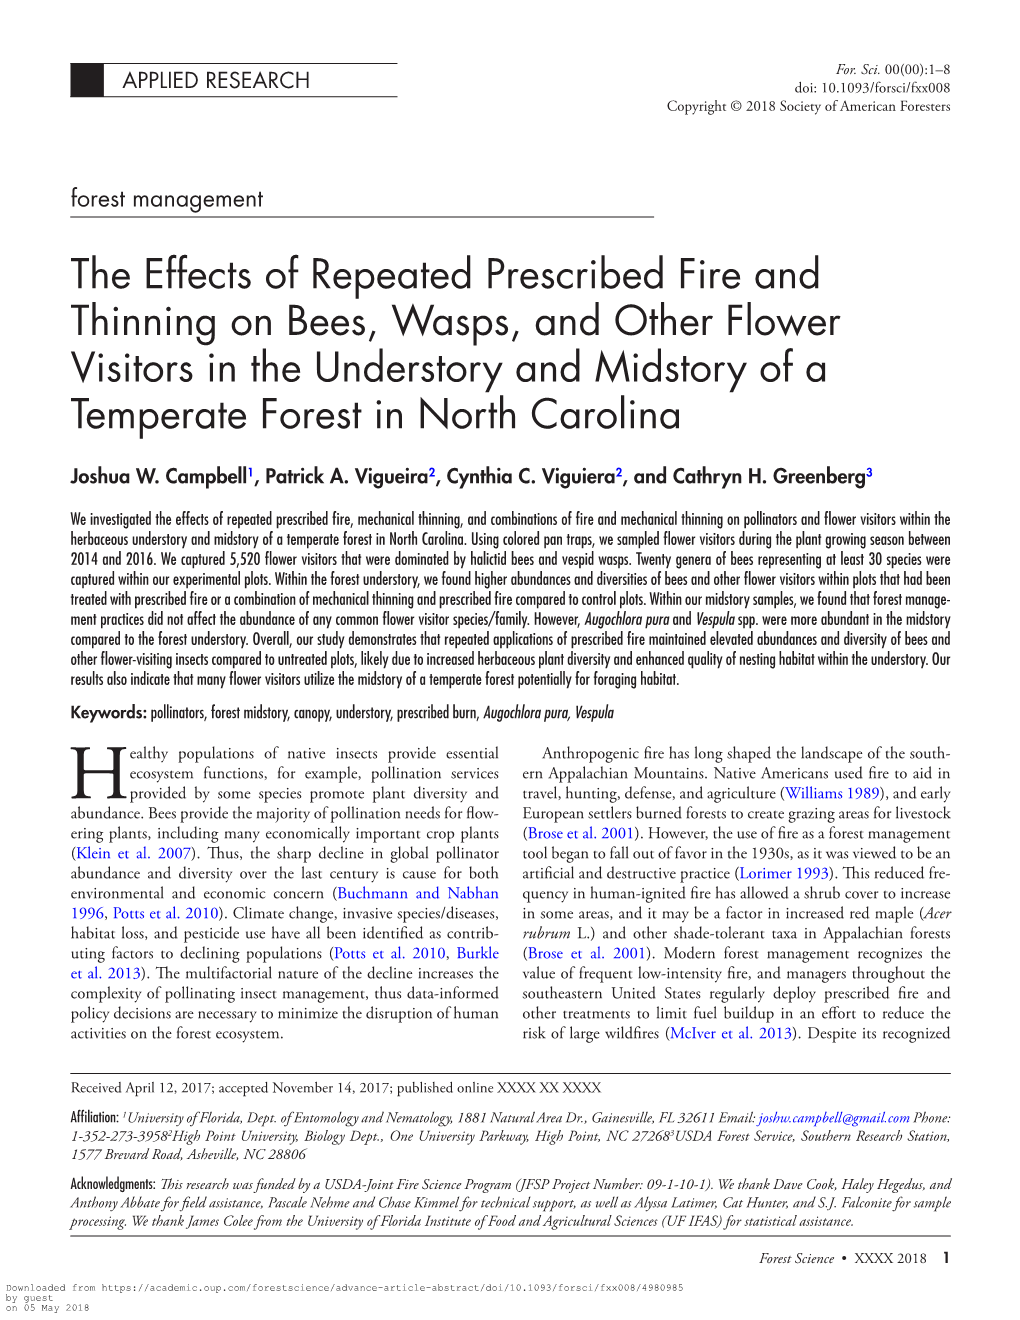 The Effects of Repeated Prescribed Fire and Thinning on Bees, Wasps, and Other Flower Visitors in the Understory and Midstory of a Temperate Forest in North Carolina